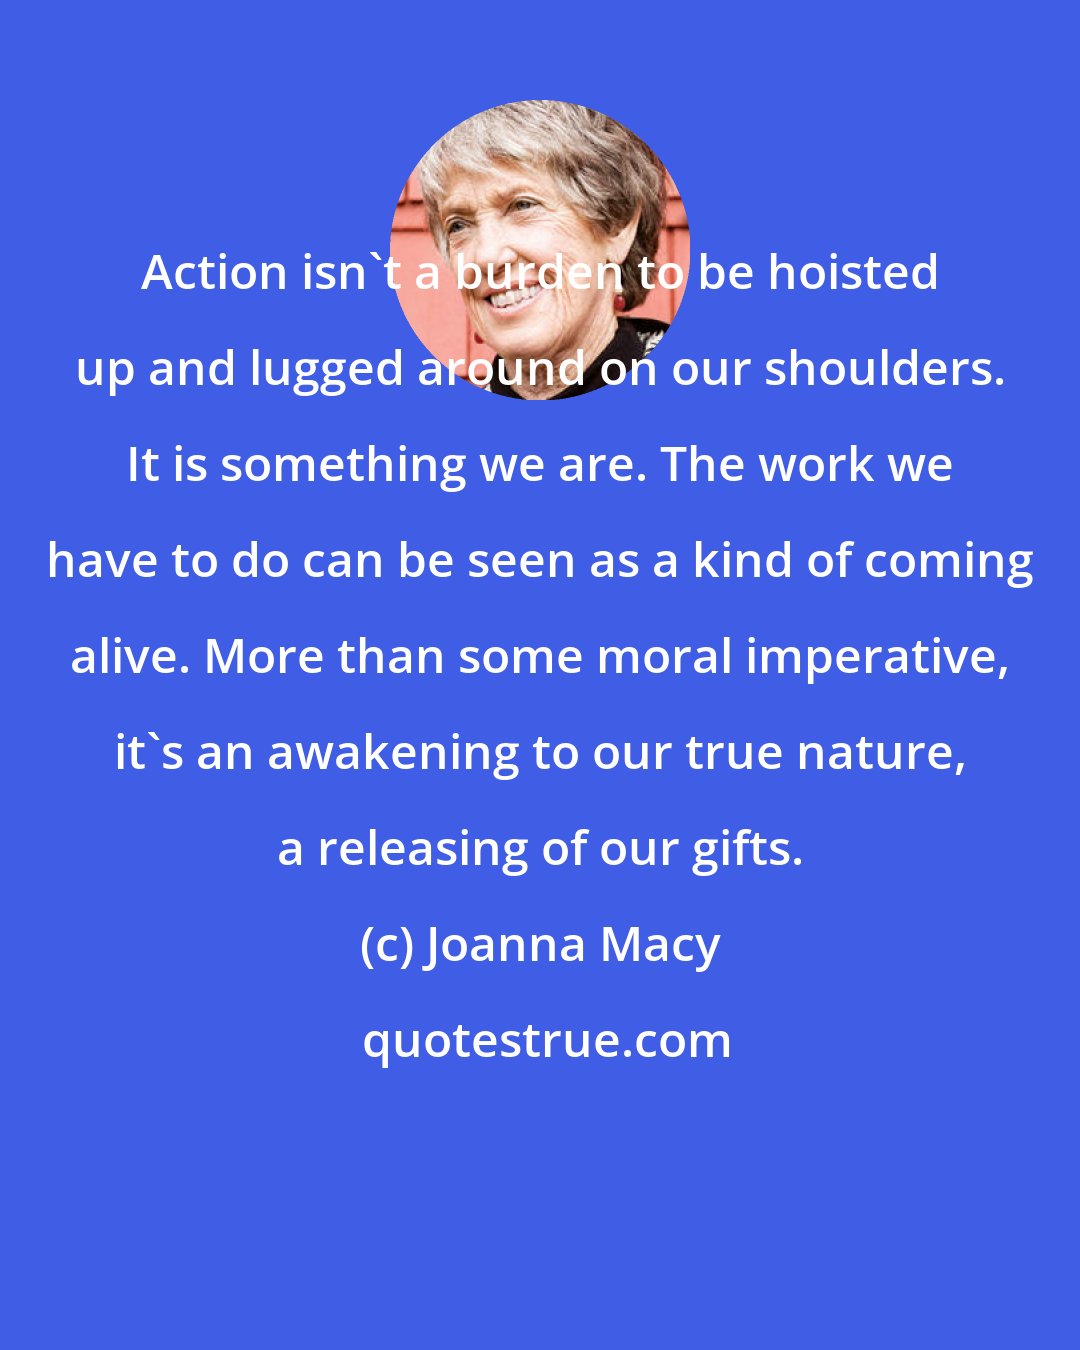 Joanna Macy: Action isn't a burden to be hoisted up and lugged around on our shoulders. It is something we are. The work we have to do can be seen as a kind of coming alive. More than some moral imperative, it's an awakening to our true nature, a releasing of our gifts.